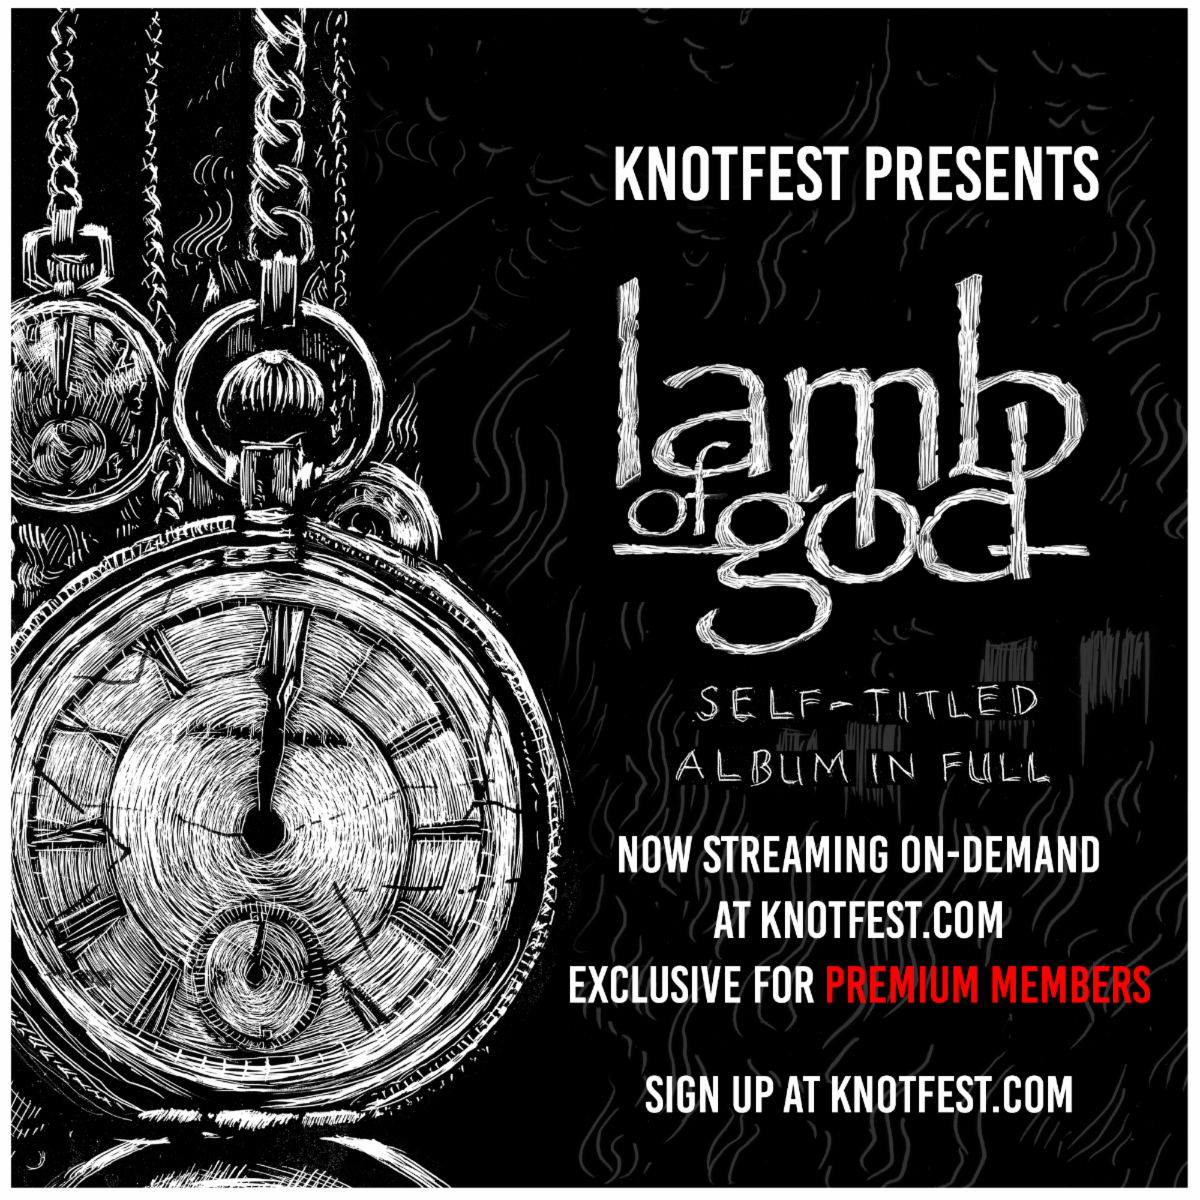 Knotfest Releases Lamb of God’s "Live In Richmond" On-Demand - Stream